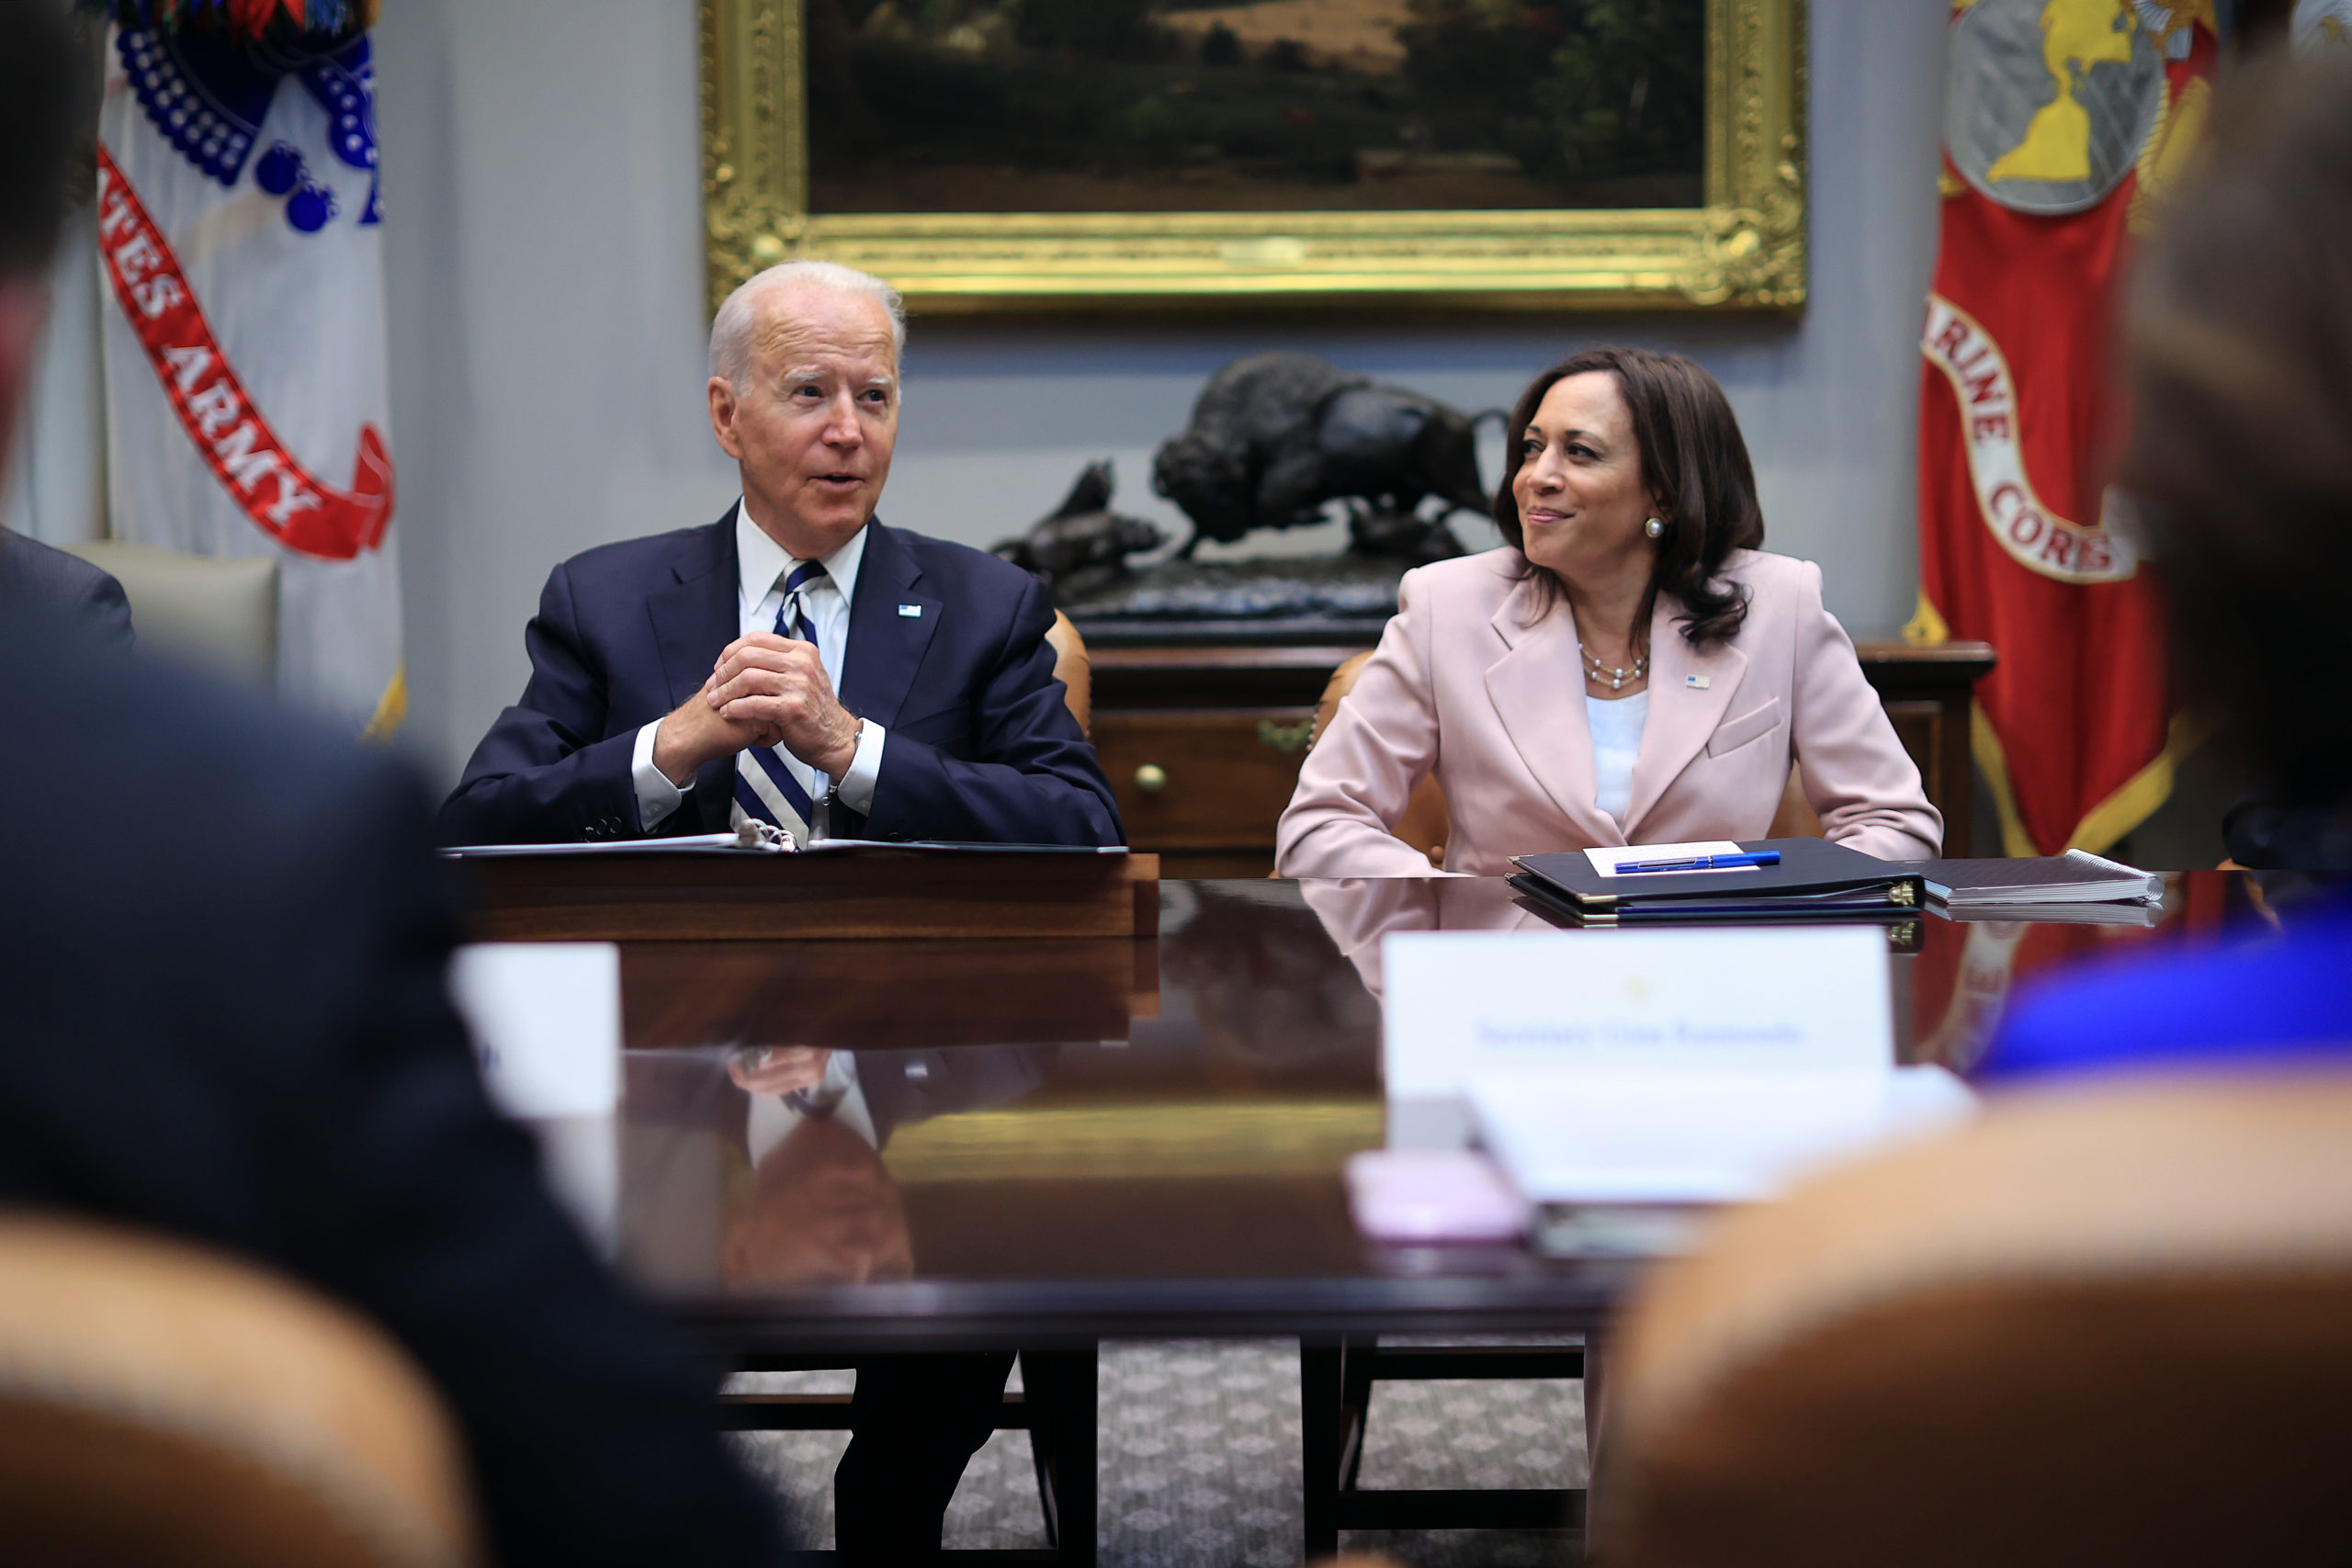 President Joe Biden and Vice President Kamala Harris meet with a bipartisan group of leaders on Wednesday. (Chip Somodevilla/Getty Images)